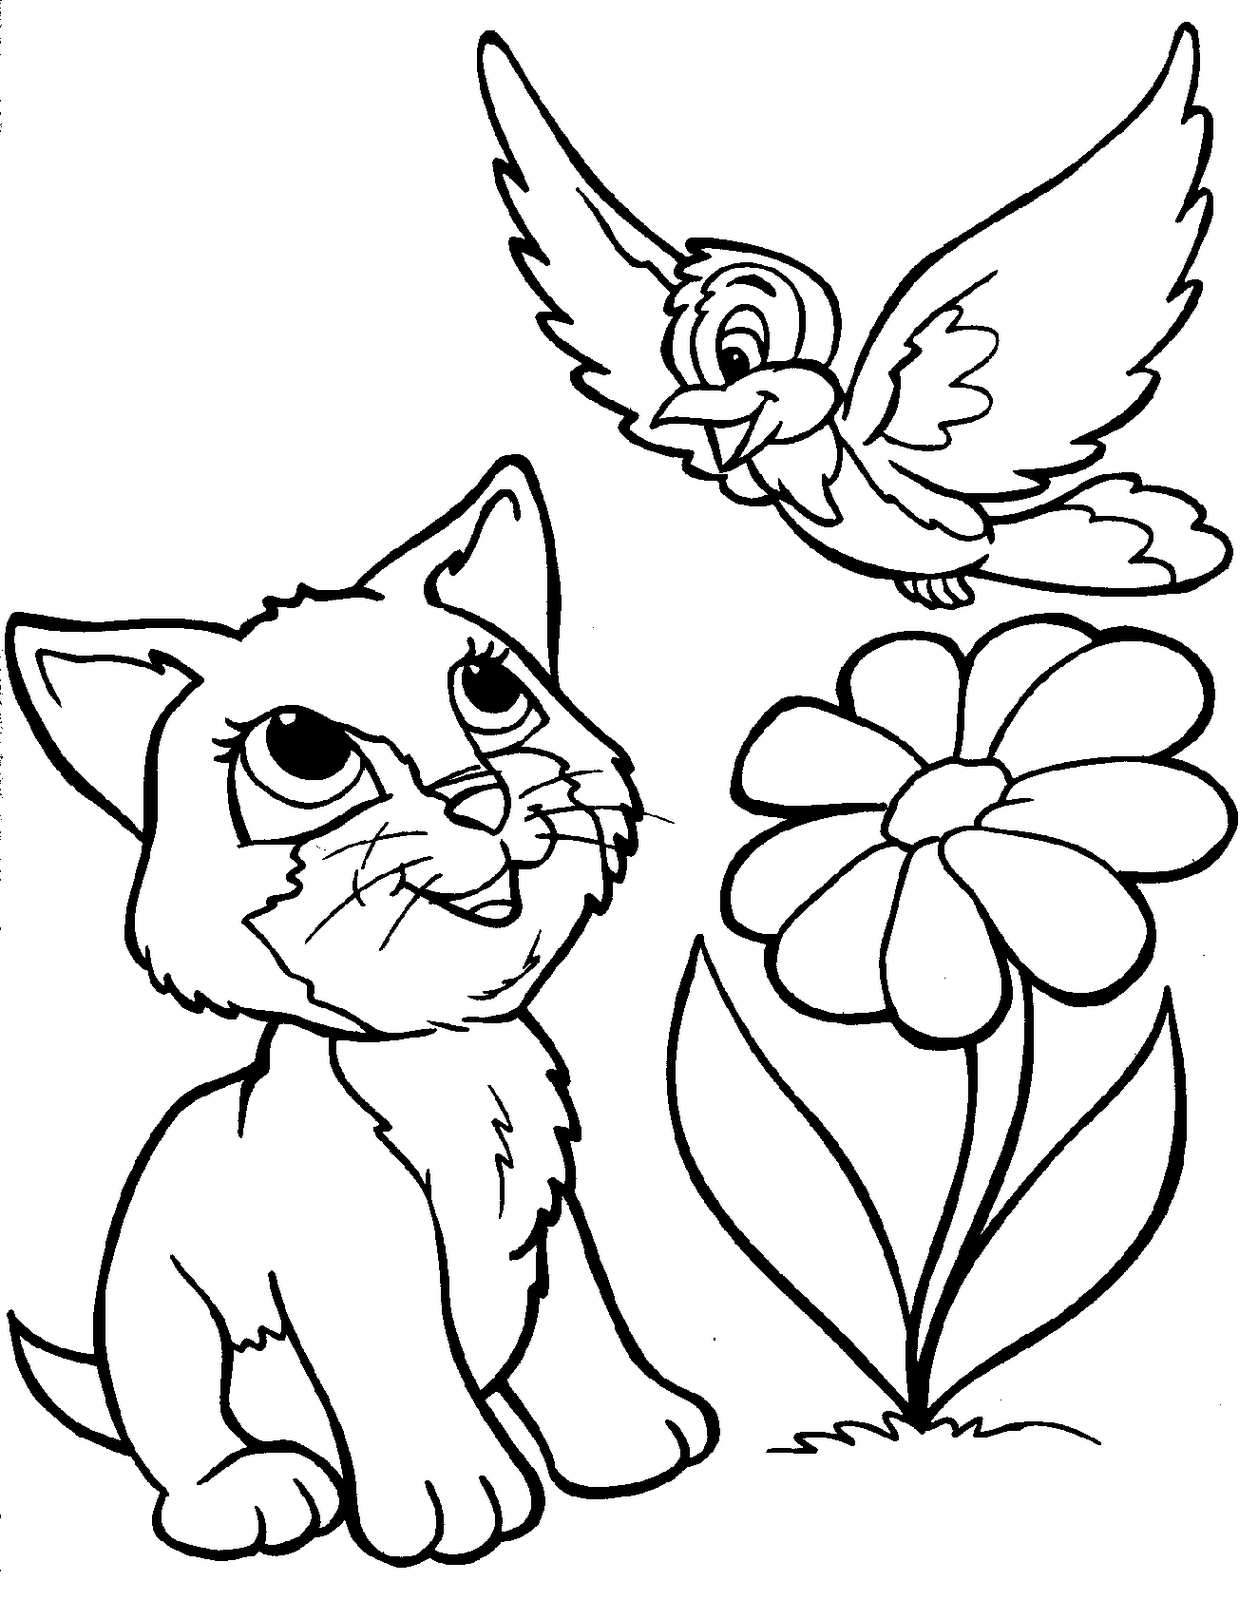 Cat Playing With A Bird Coloring Page